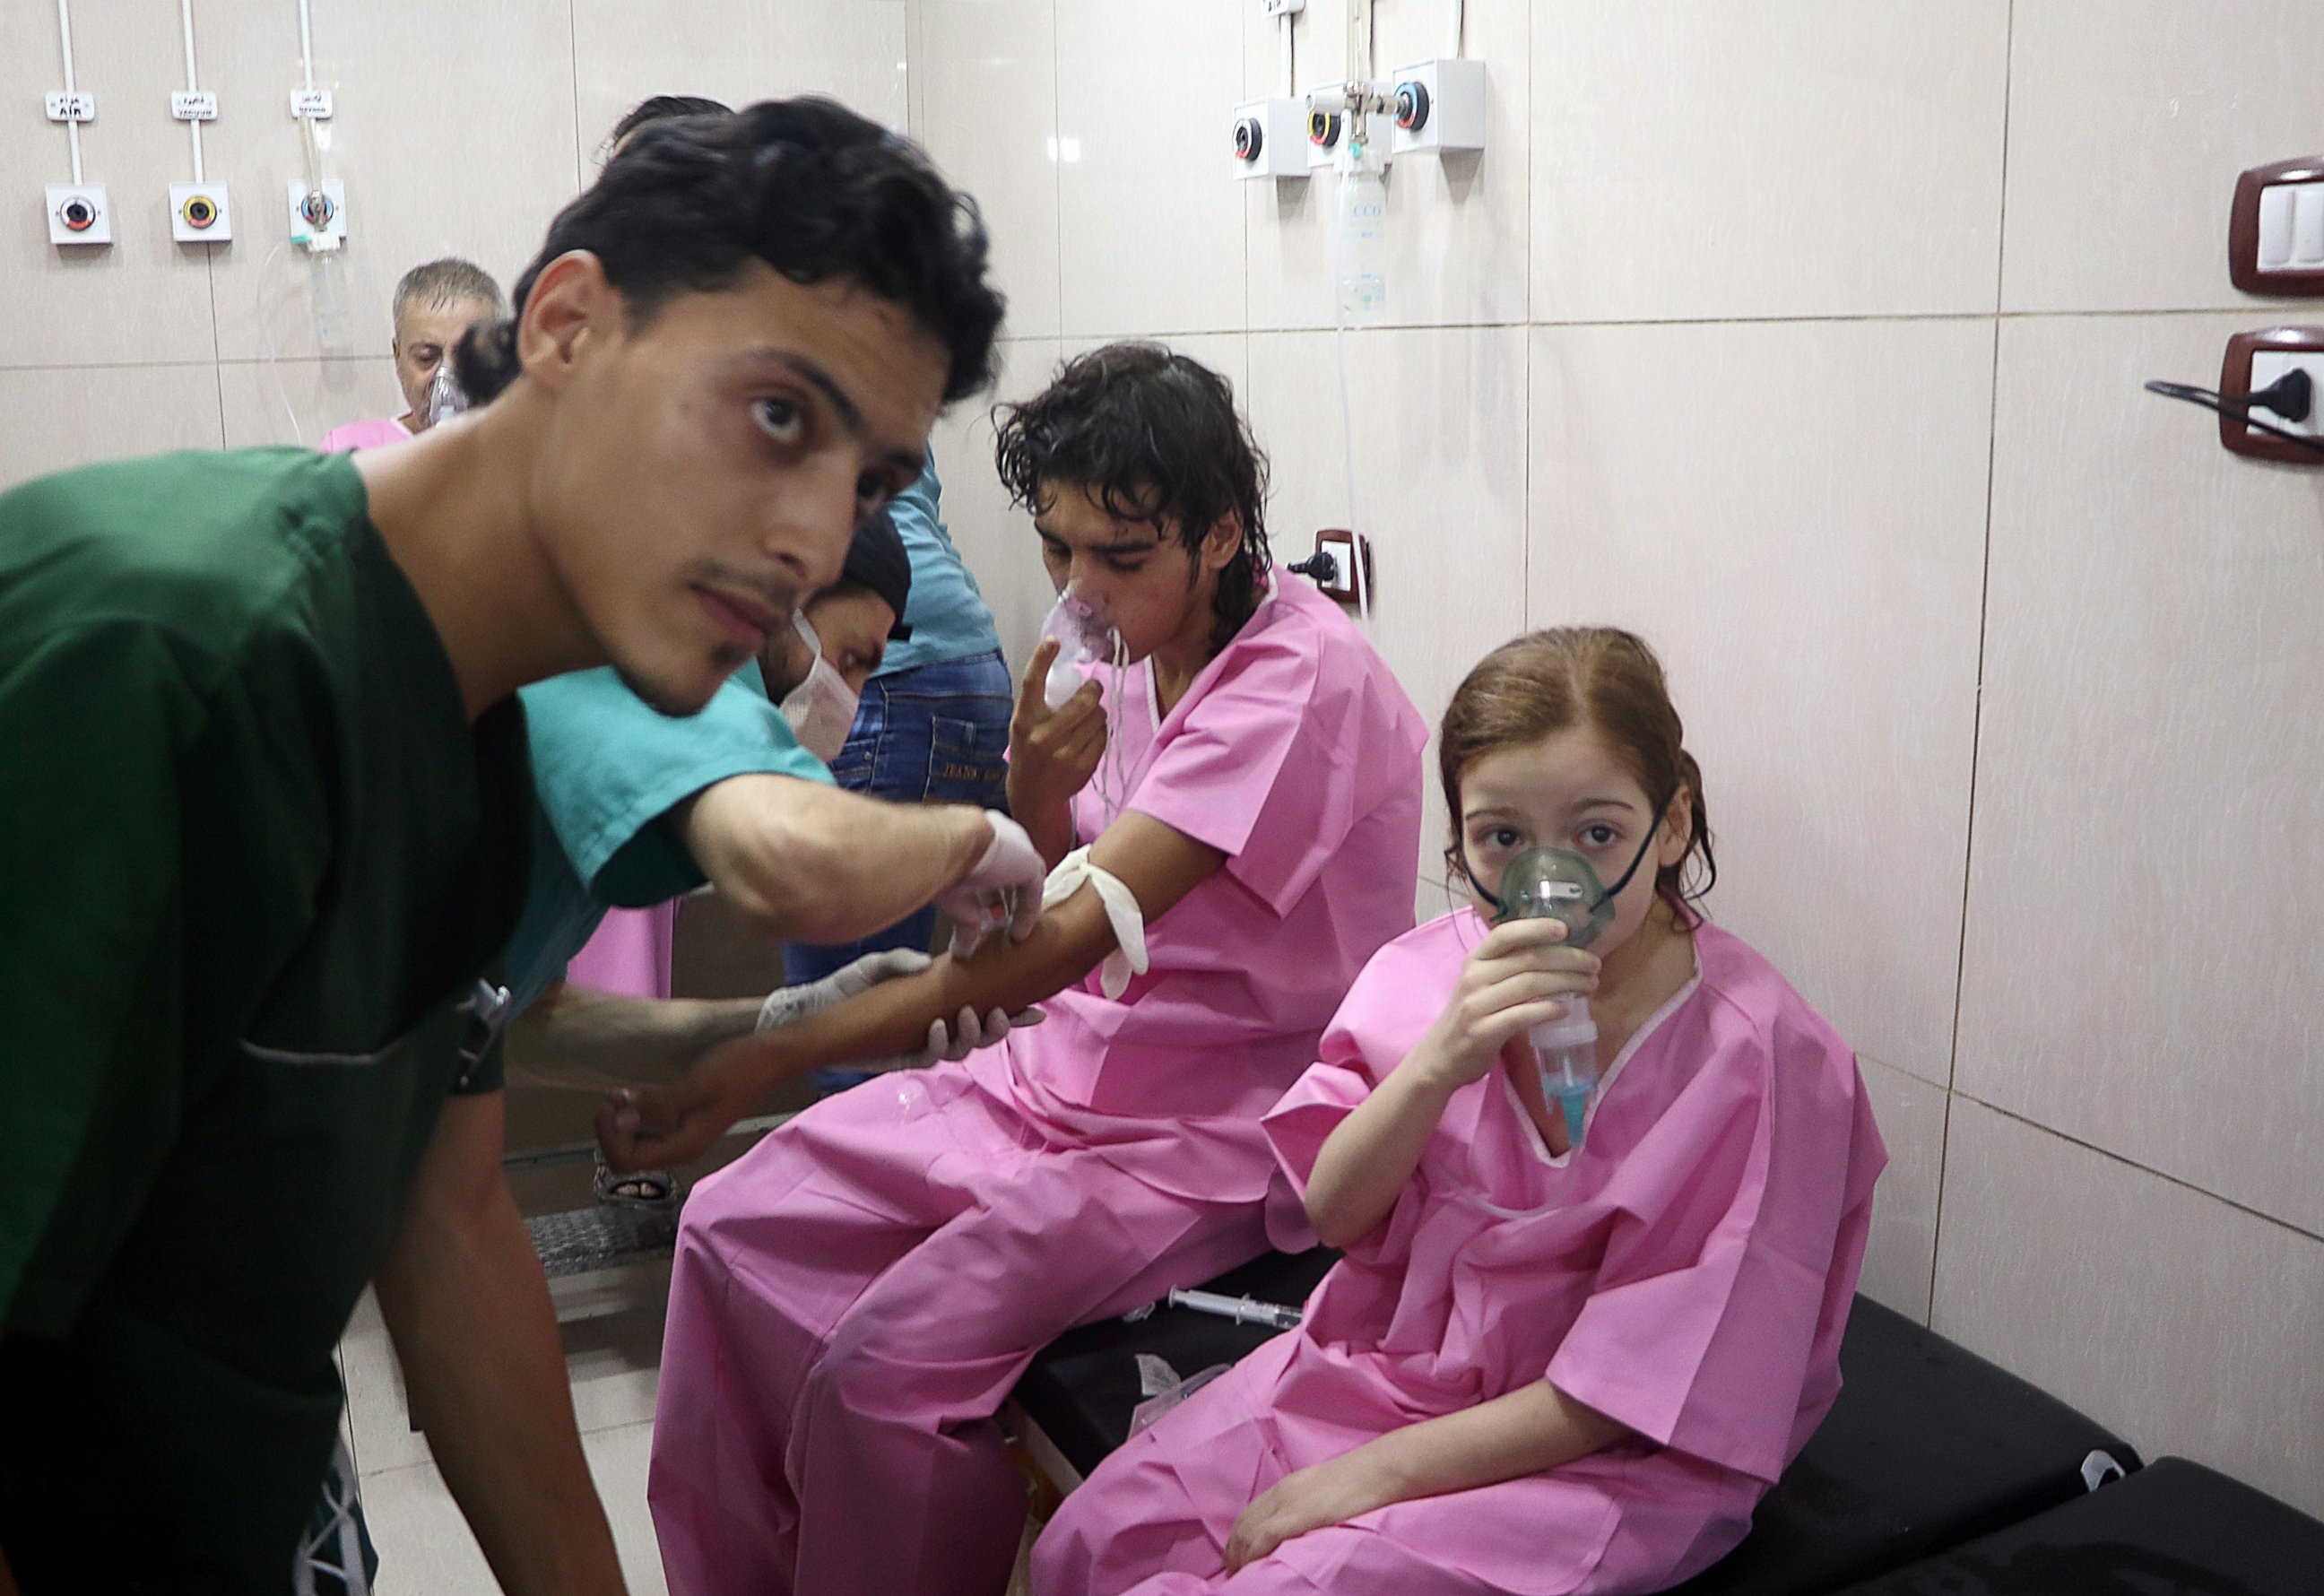 PHOTO: Civilians receive medical treatment after a helicopter belonging to the Assad regime forces carried out a barrel bomb attack over residential areas at opposition controlled Sukkeri region of Aleppo, Syria on September 6, 2016.